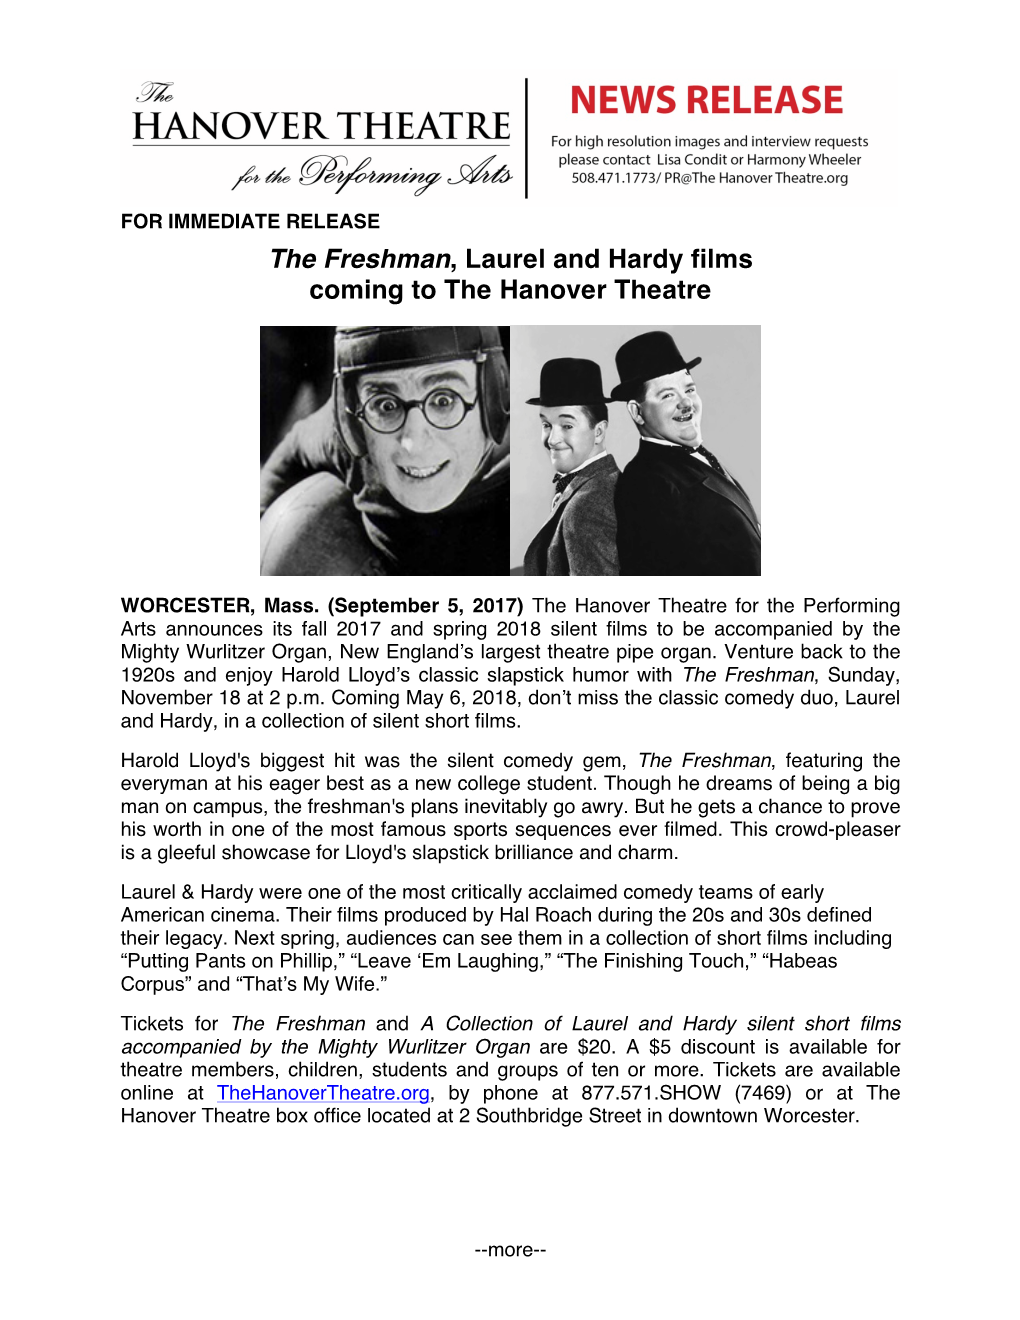 The Freshman, Laurel and Hardy Films Coming to the Hanover Theatre